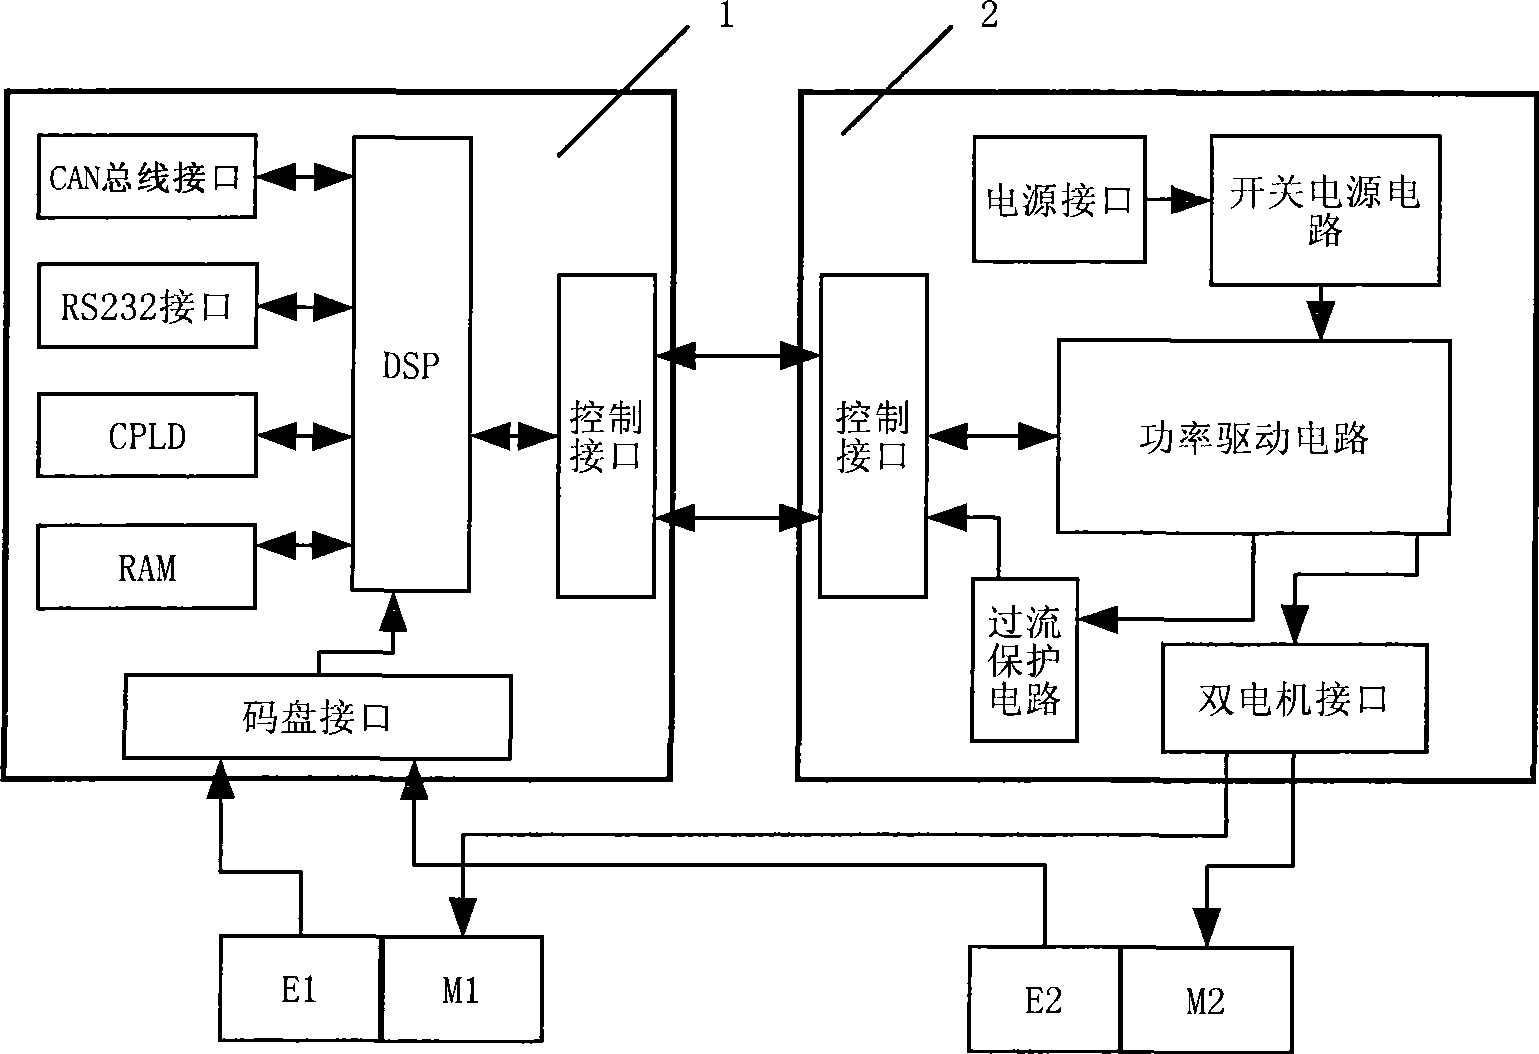 Dual-motor synchronous servo drive device based on DSP